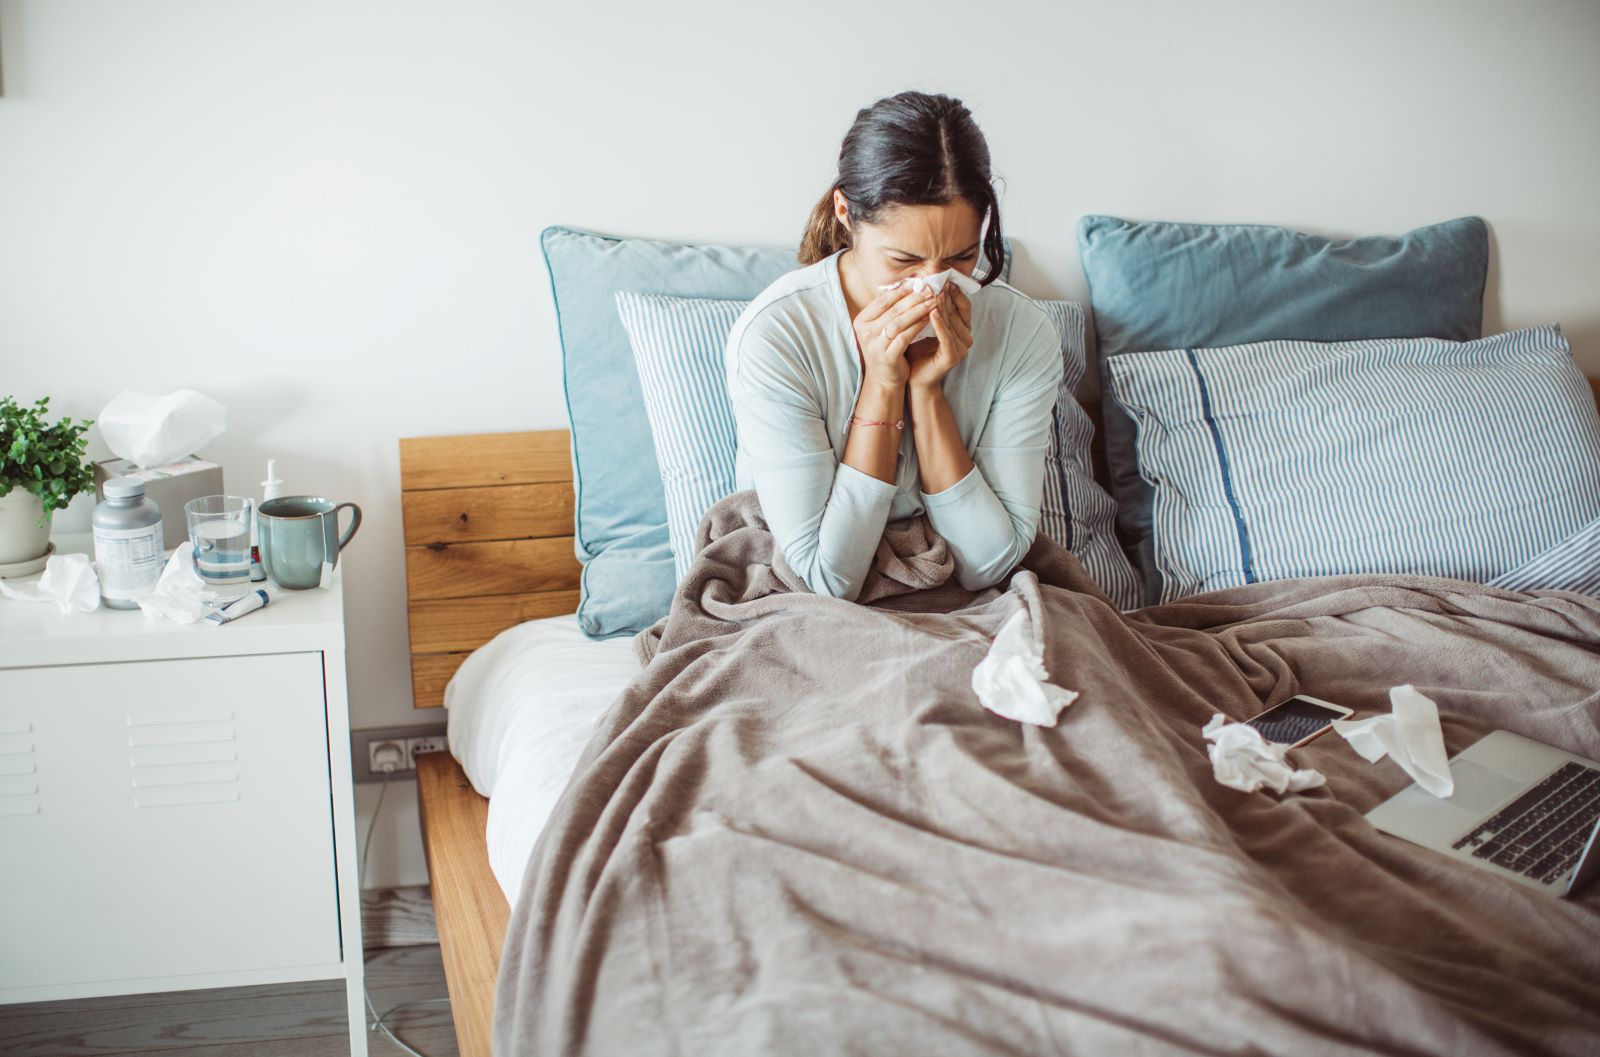 What's Causing Your Sniffles - Cold, Sinus Infection or Allergies?